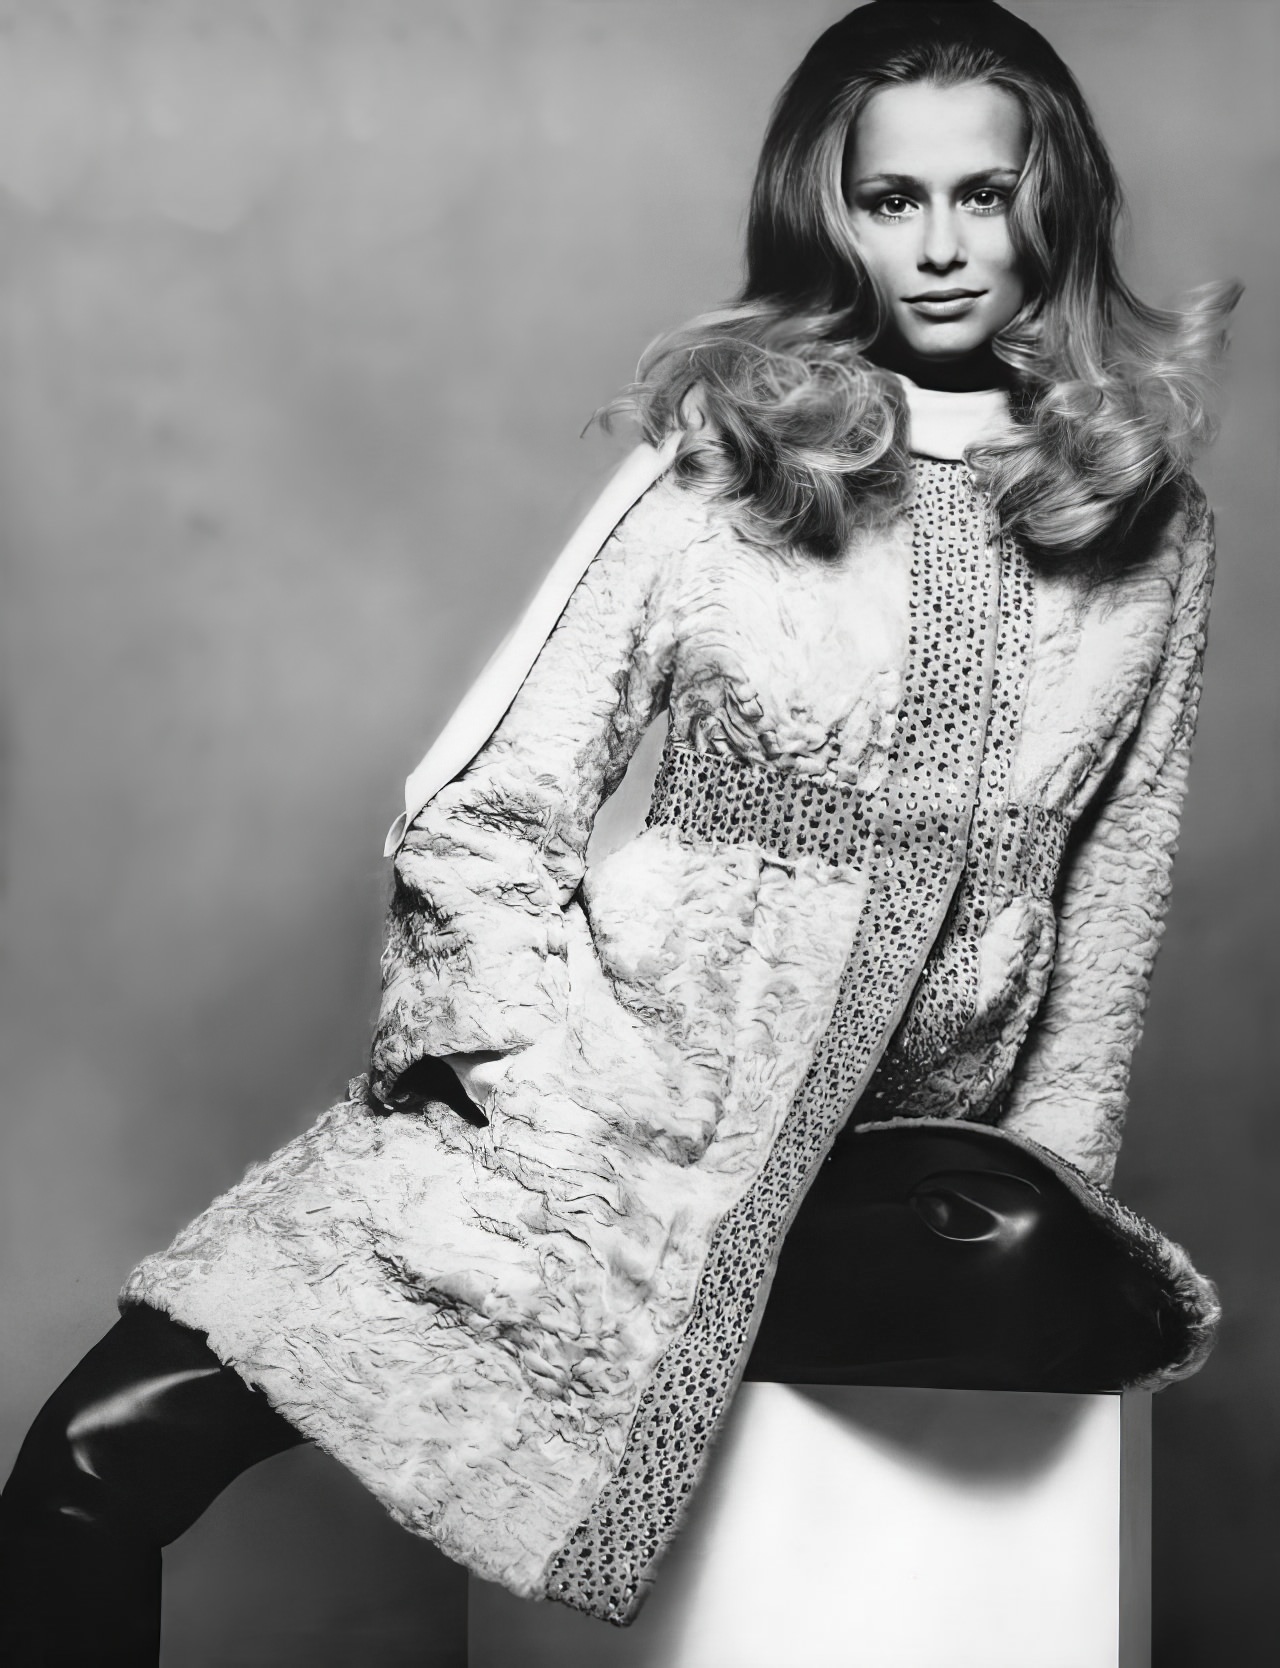 Lauren Hutton in a violet-dyed Swakara lamb coat by Chambers Sherwin, Vogue, November 1, 1968.